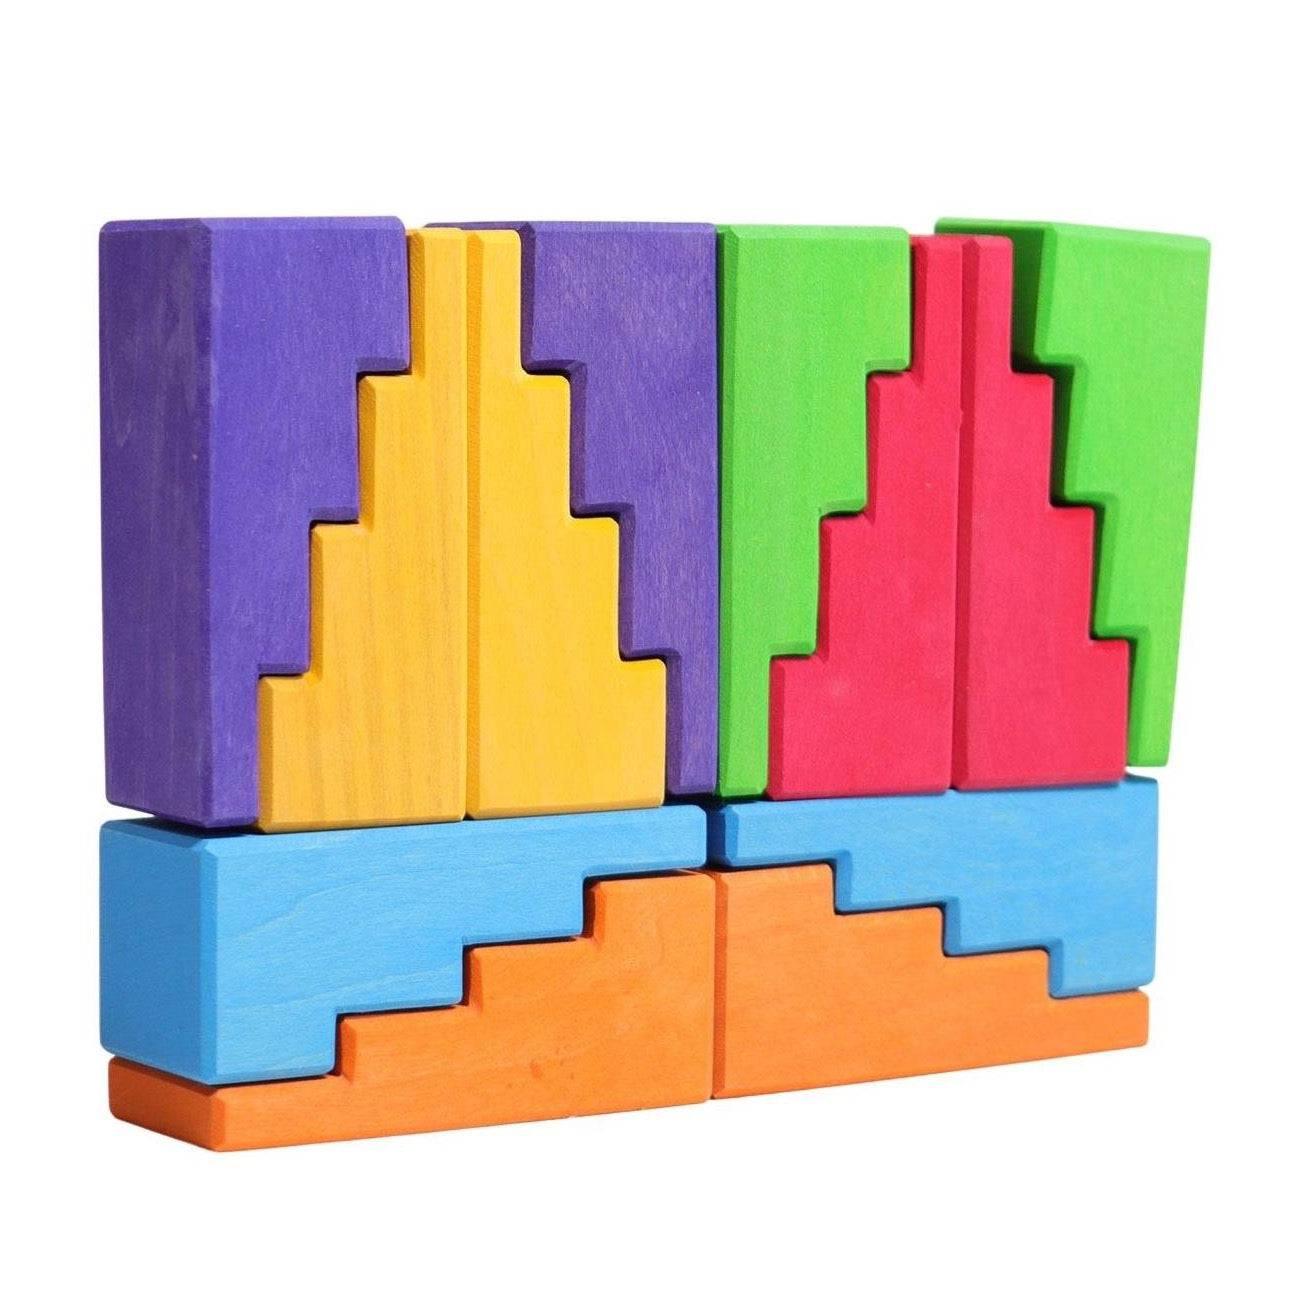 Grimm's Wooden Stepped Roofs Building Blocks Set - Rainbow - Why and Whale